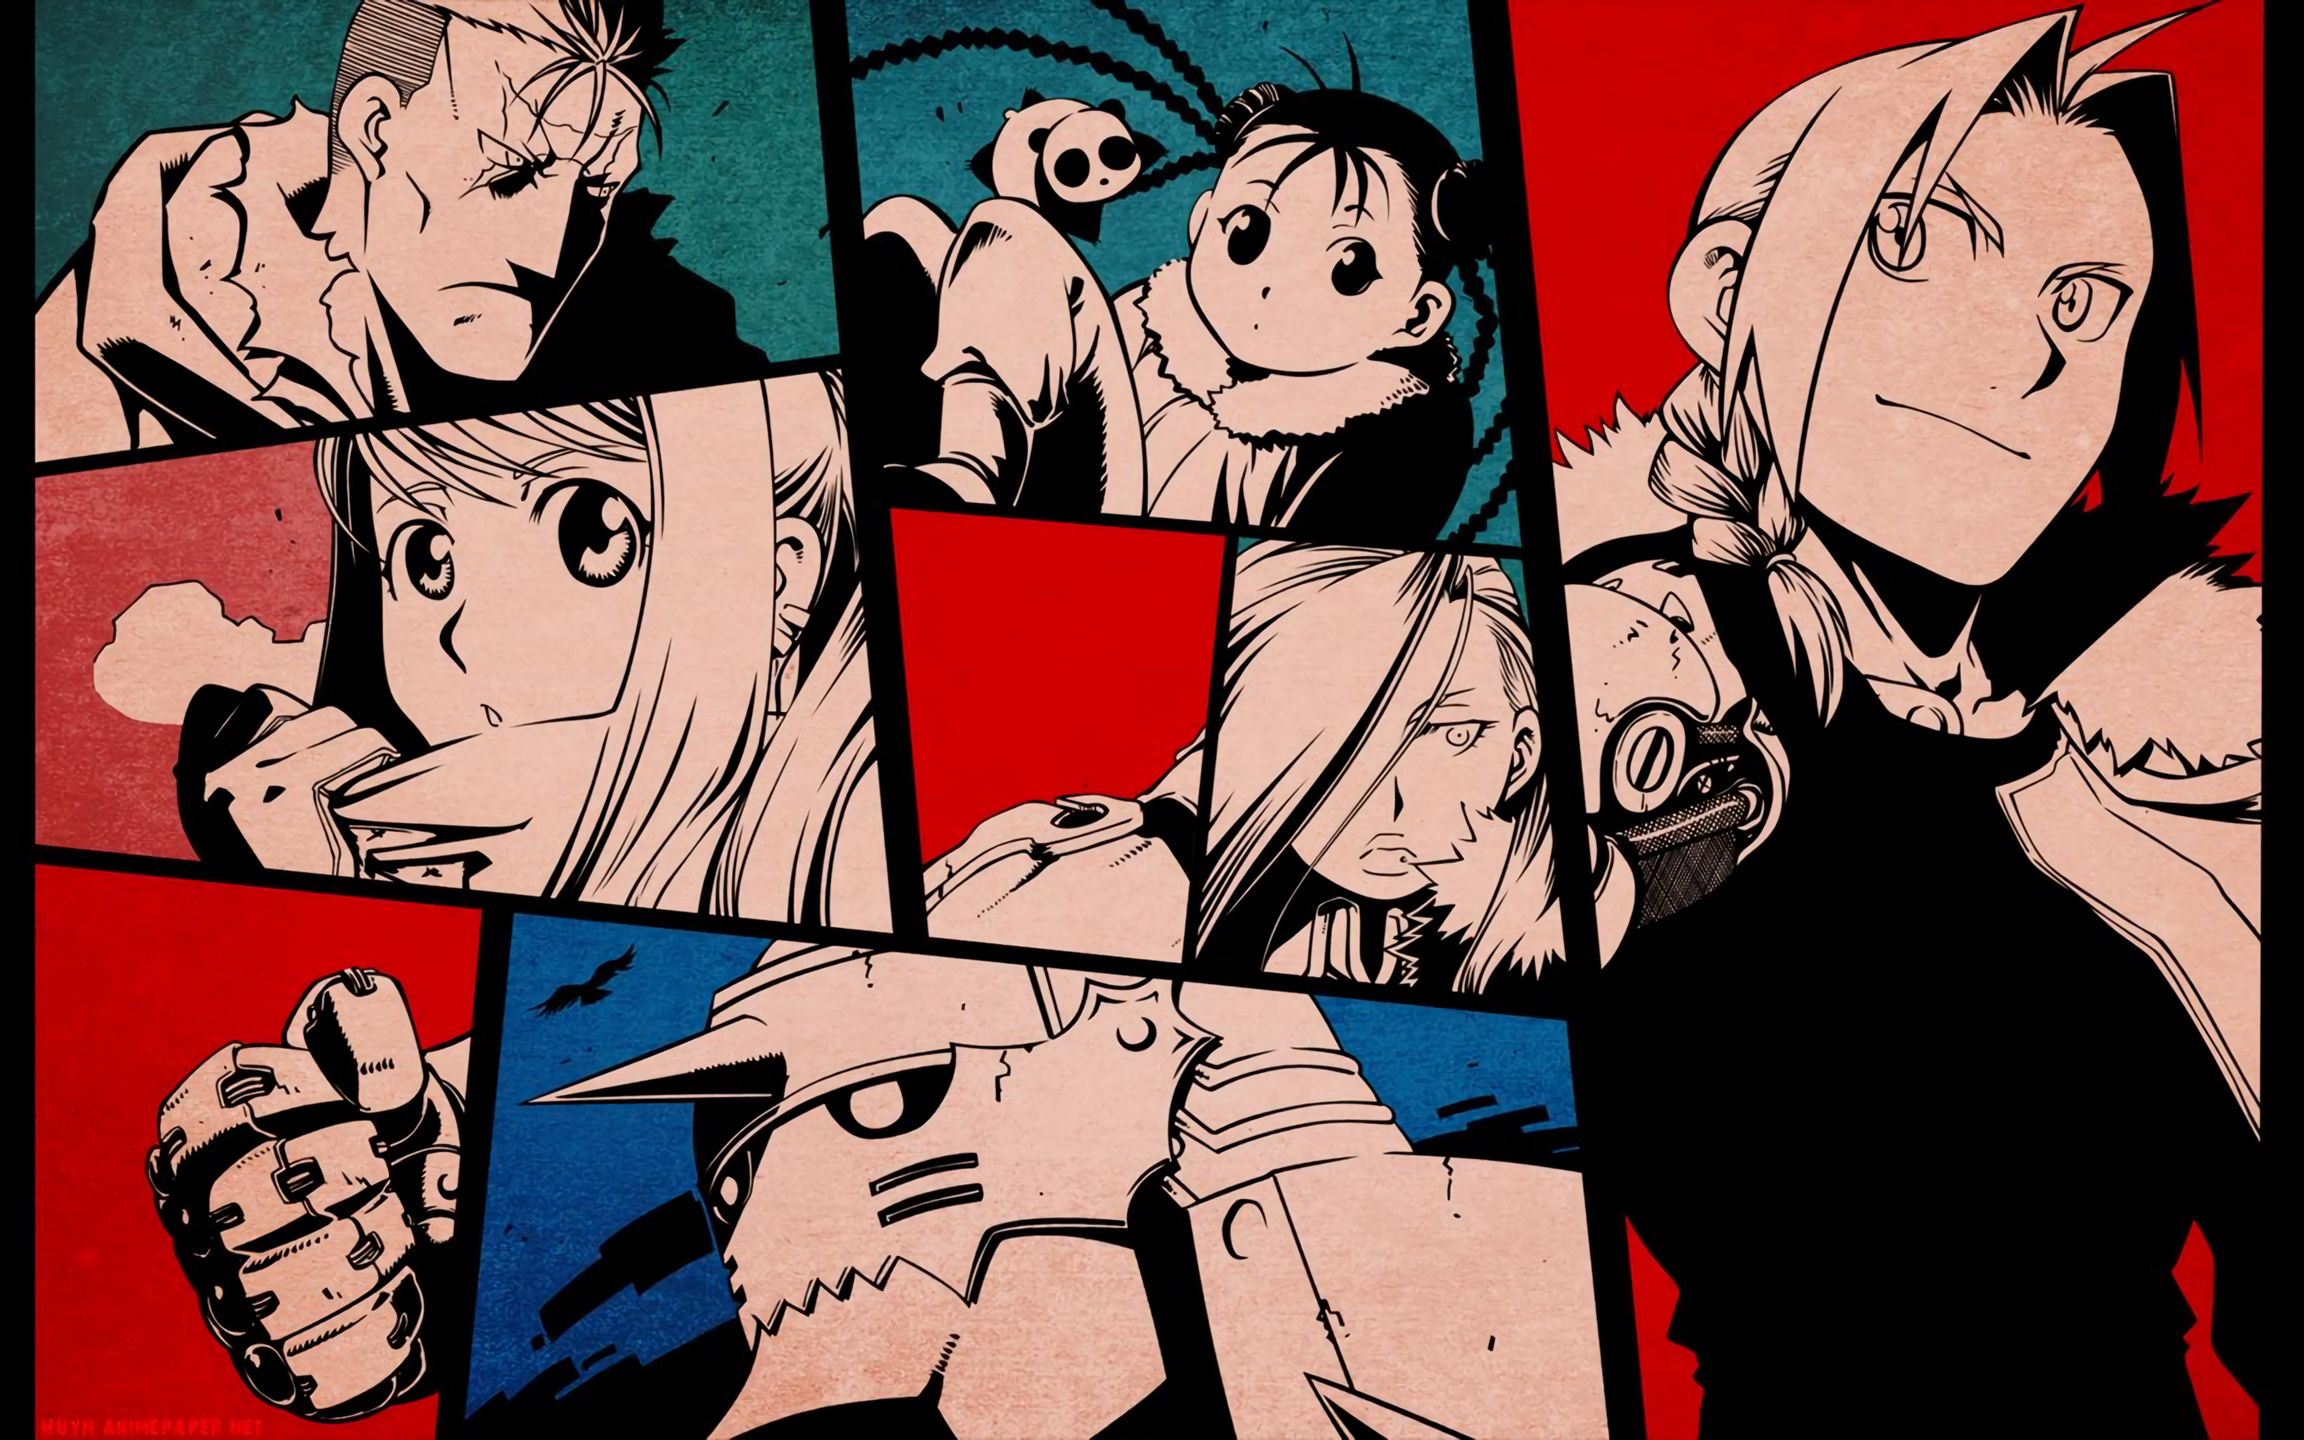 olivier mira armstrong, scar (fullmetal alchemist), fullmetal alchemist, anime, alphonse elric, edward elric, may chang, shao may, winry rockbell